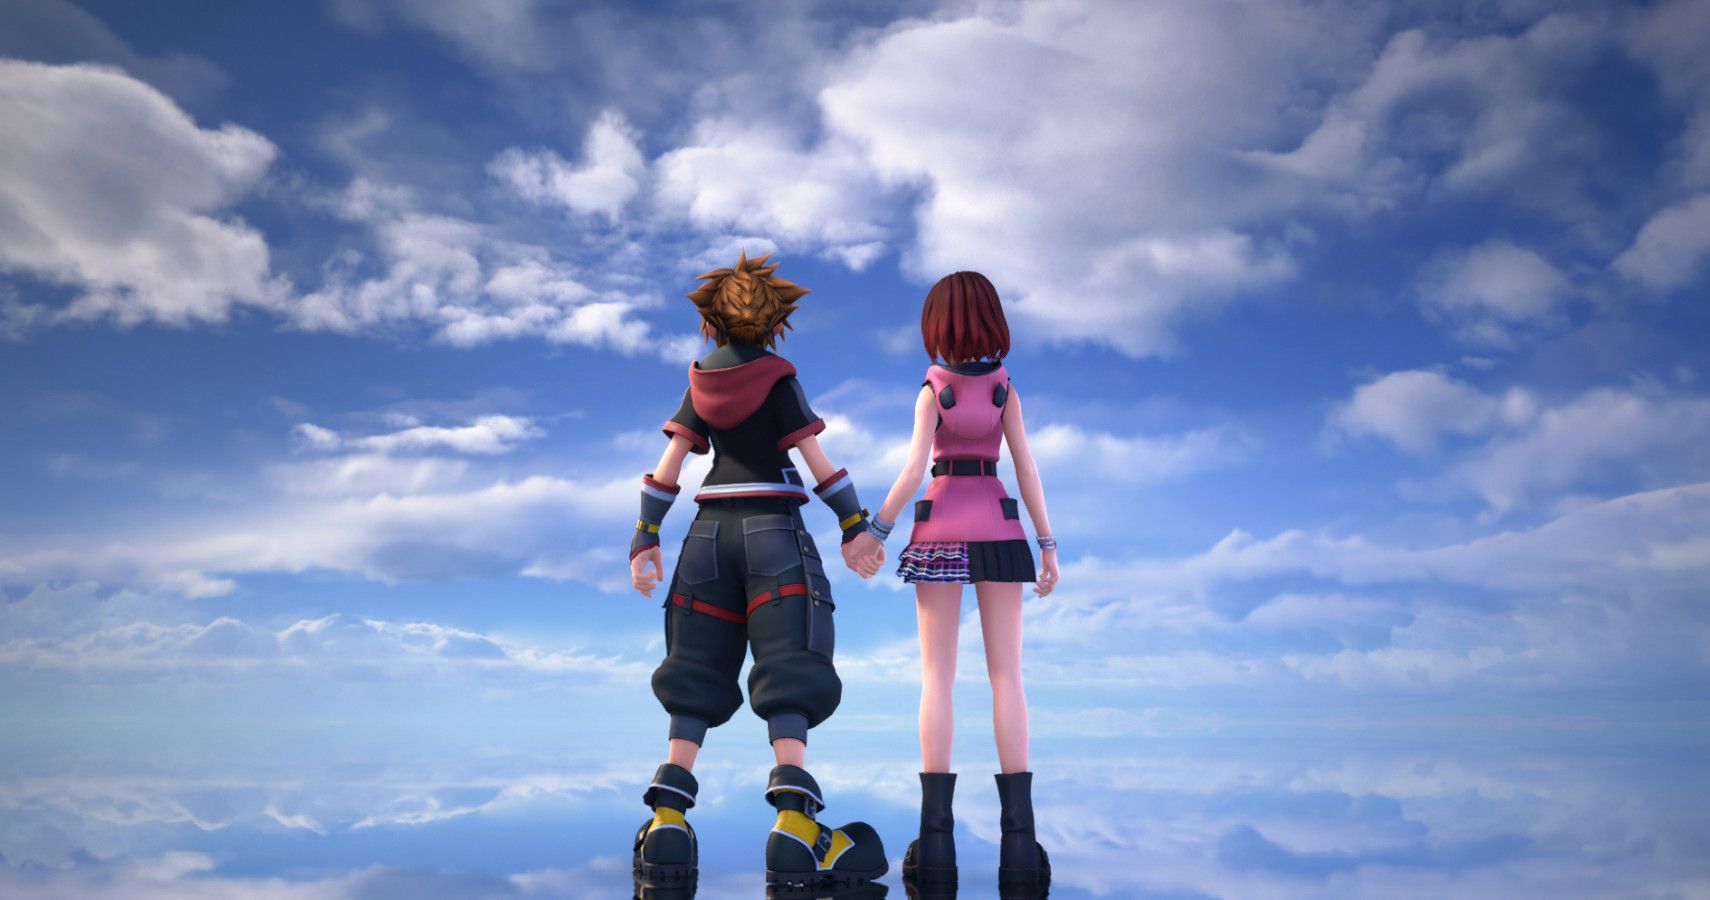 Kingdom Hearts III review: Not a small world after all